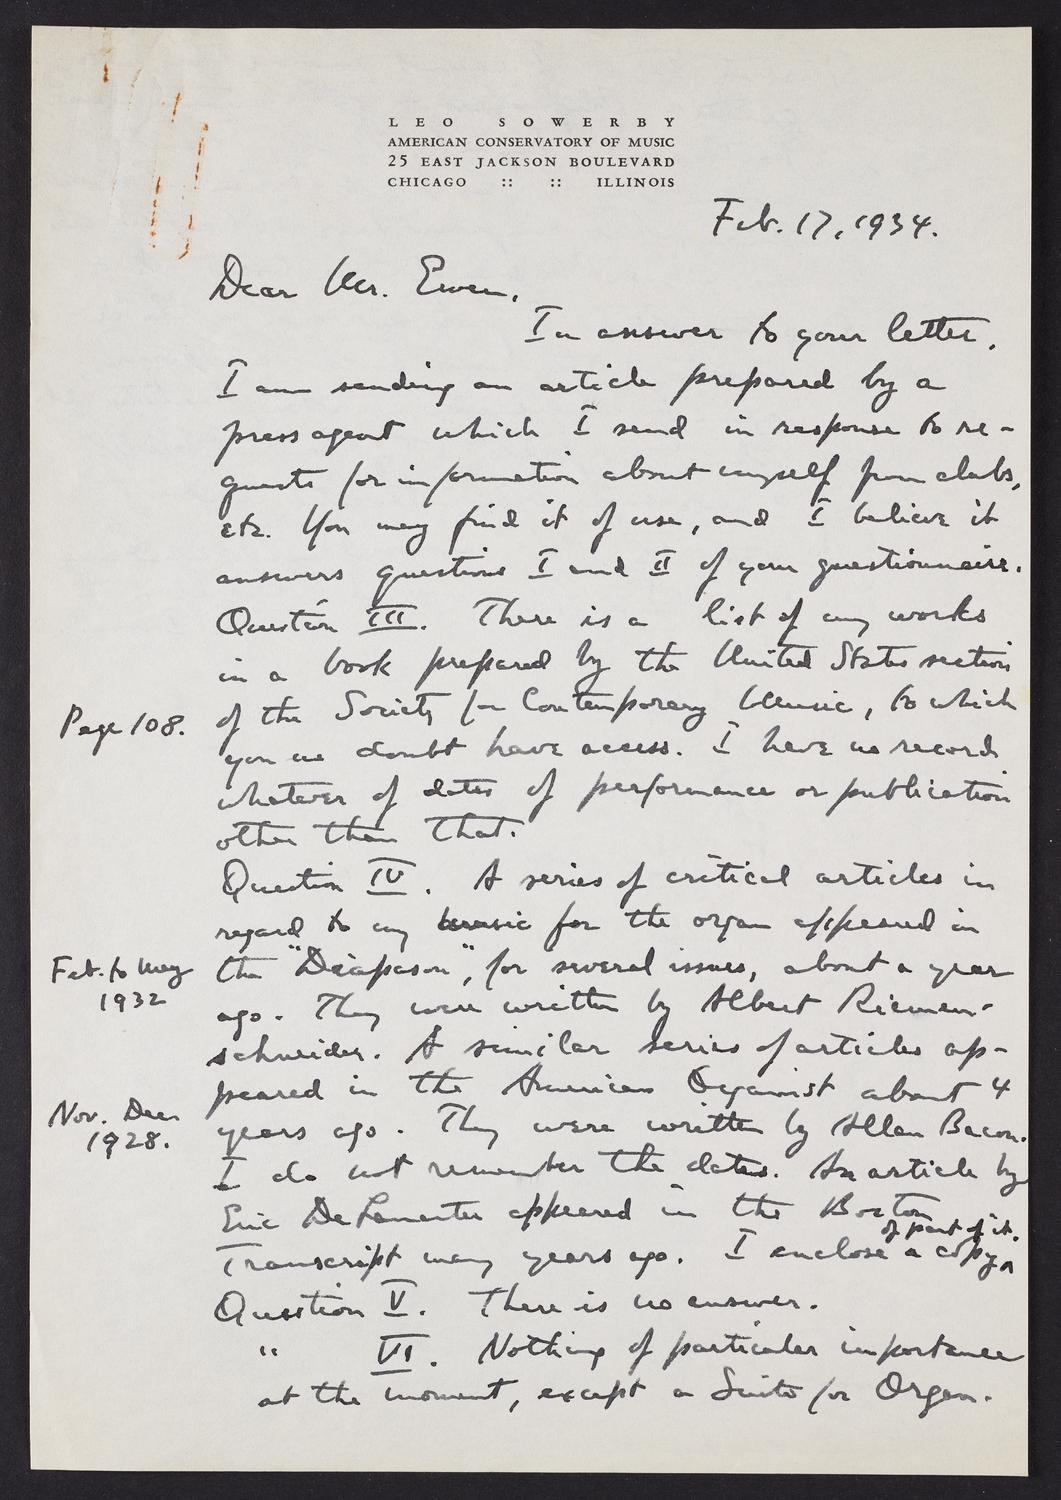 Correspondence from Leo Sowerby to David Ewen, page 1 of 2